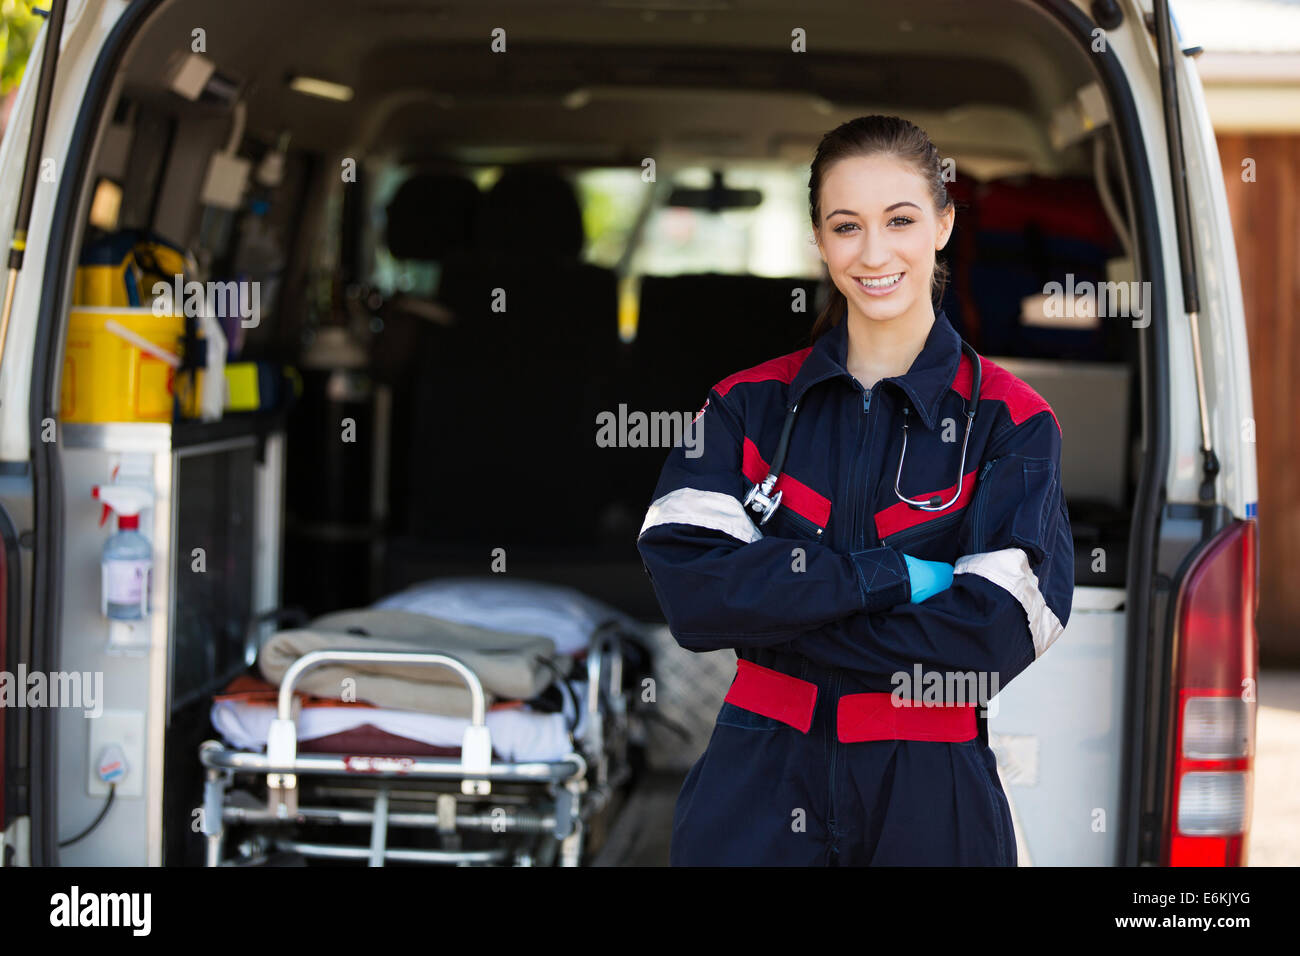 Happy female paramedic standing in front of ambulance Banque D'Images